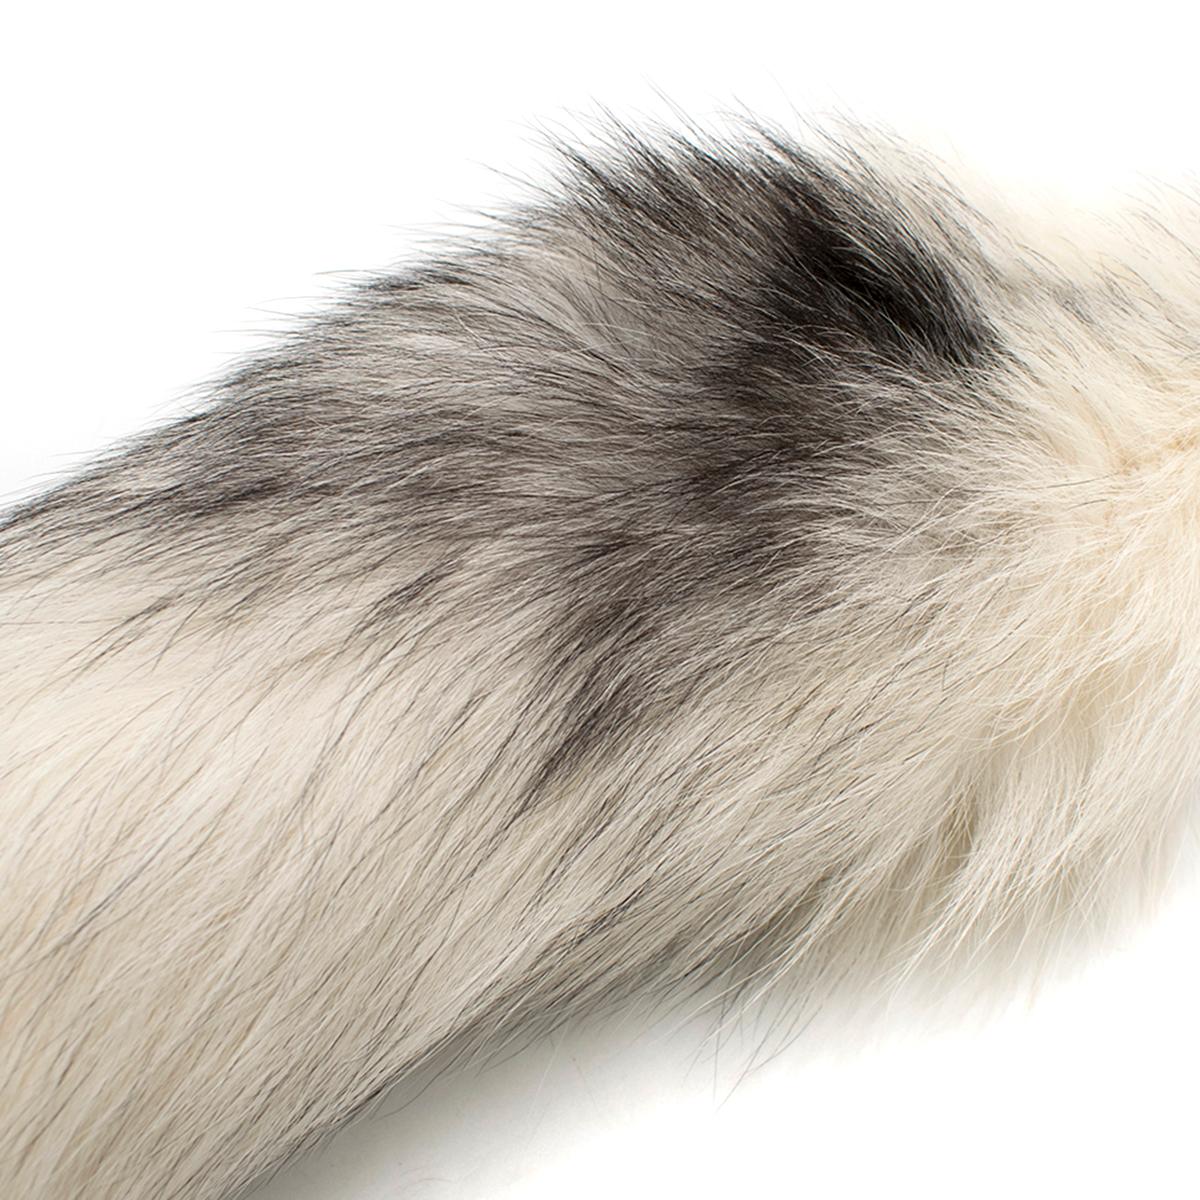 Alexander McQueen White Fox Fur Tail Charm

- 100% Fox Fur Charm
- Natural size from Finland 
- Silver toned hook attachment 
- Can be hung on necklaces, trousers, bags, keychains etc 

Please note, these items are pre-owned and may show some signs